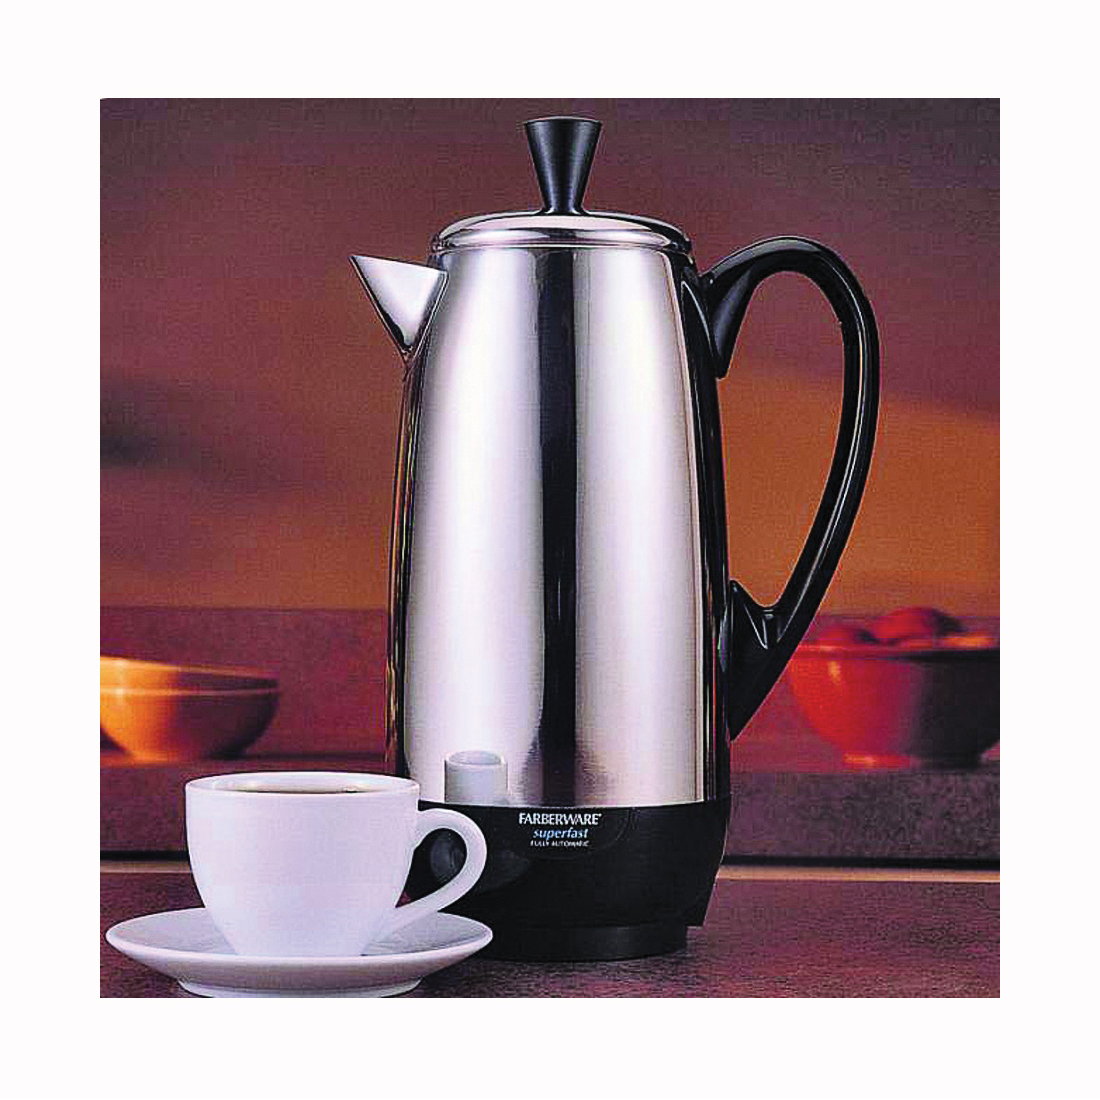 Presto Stainless Steel 2-12 Cup Electric Coffee Percolator Model